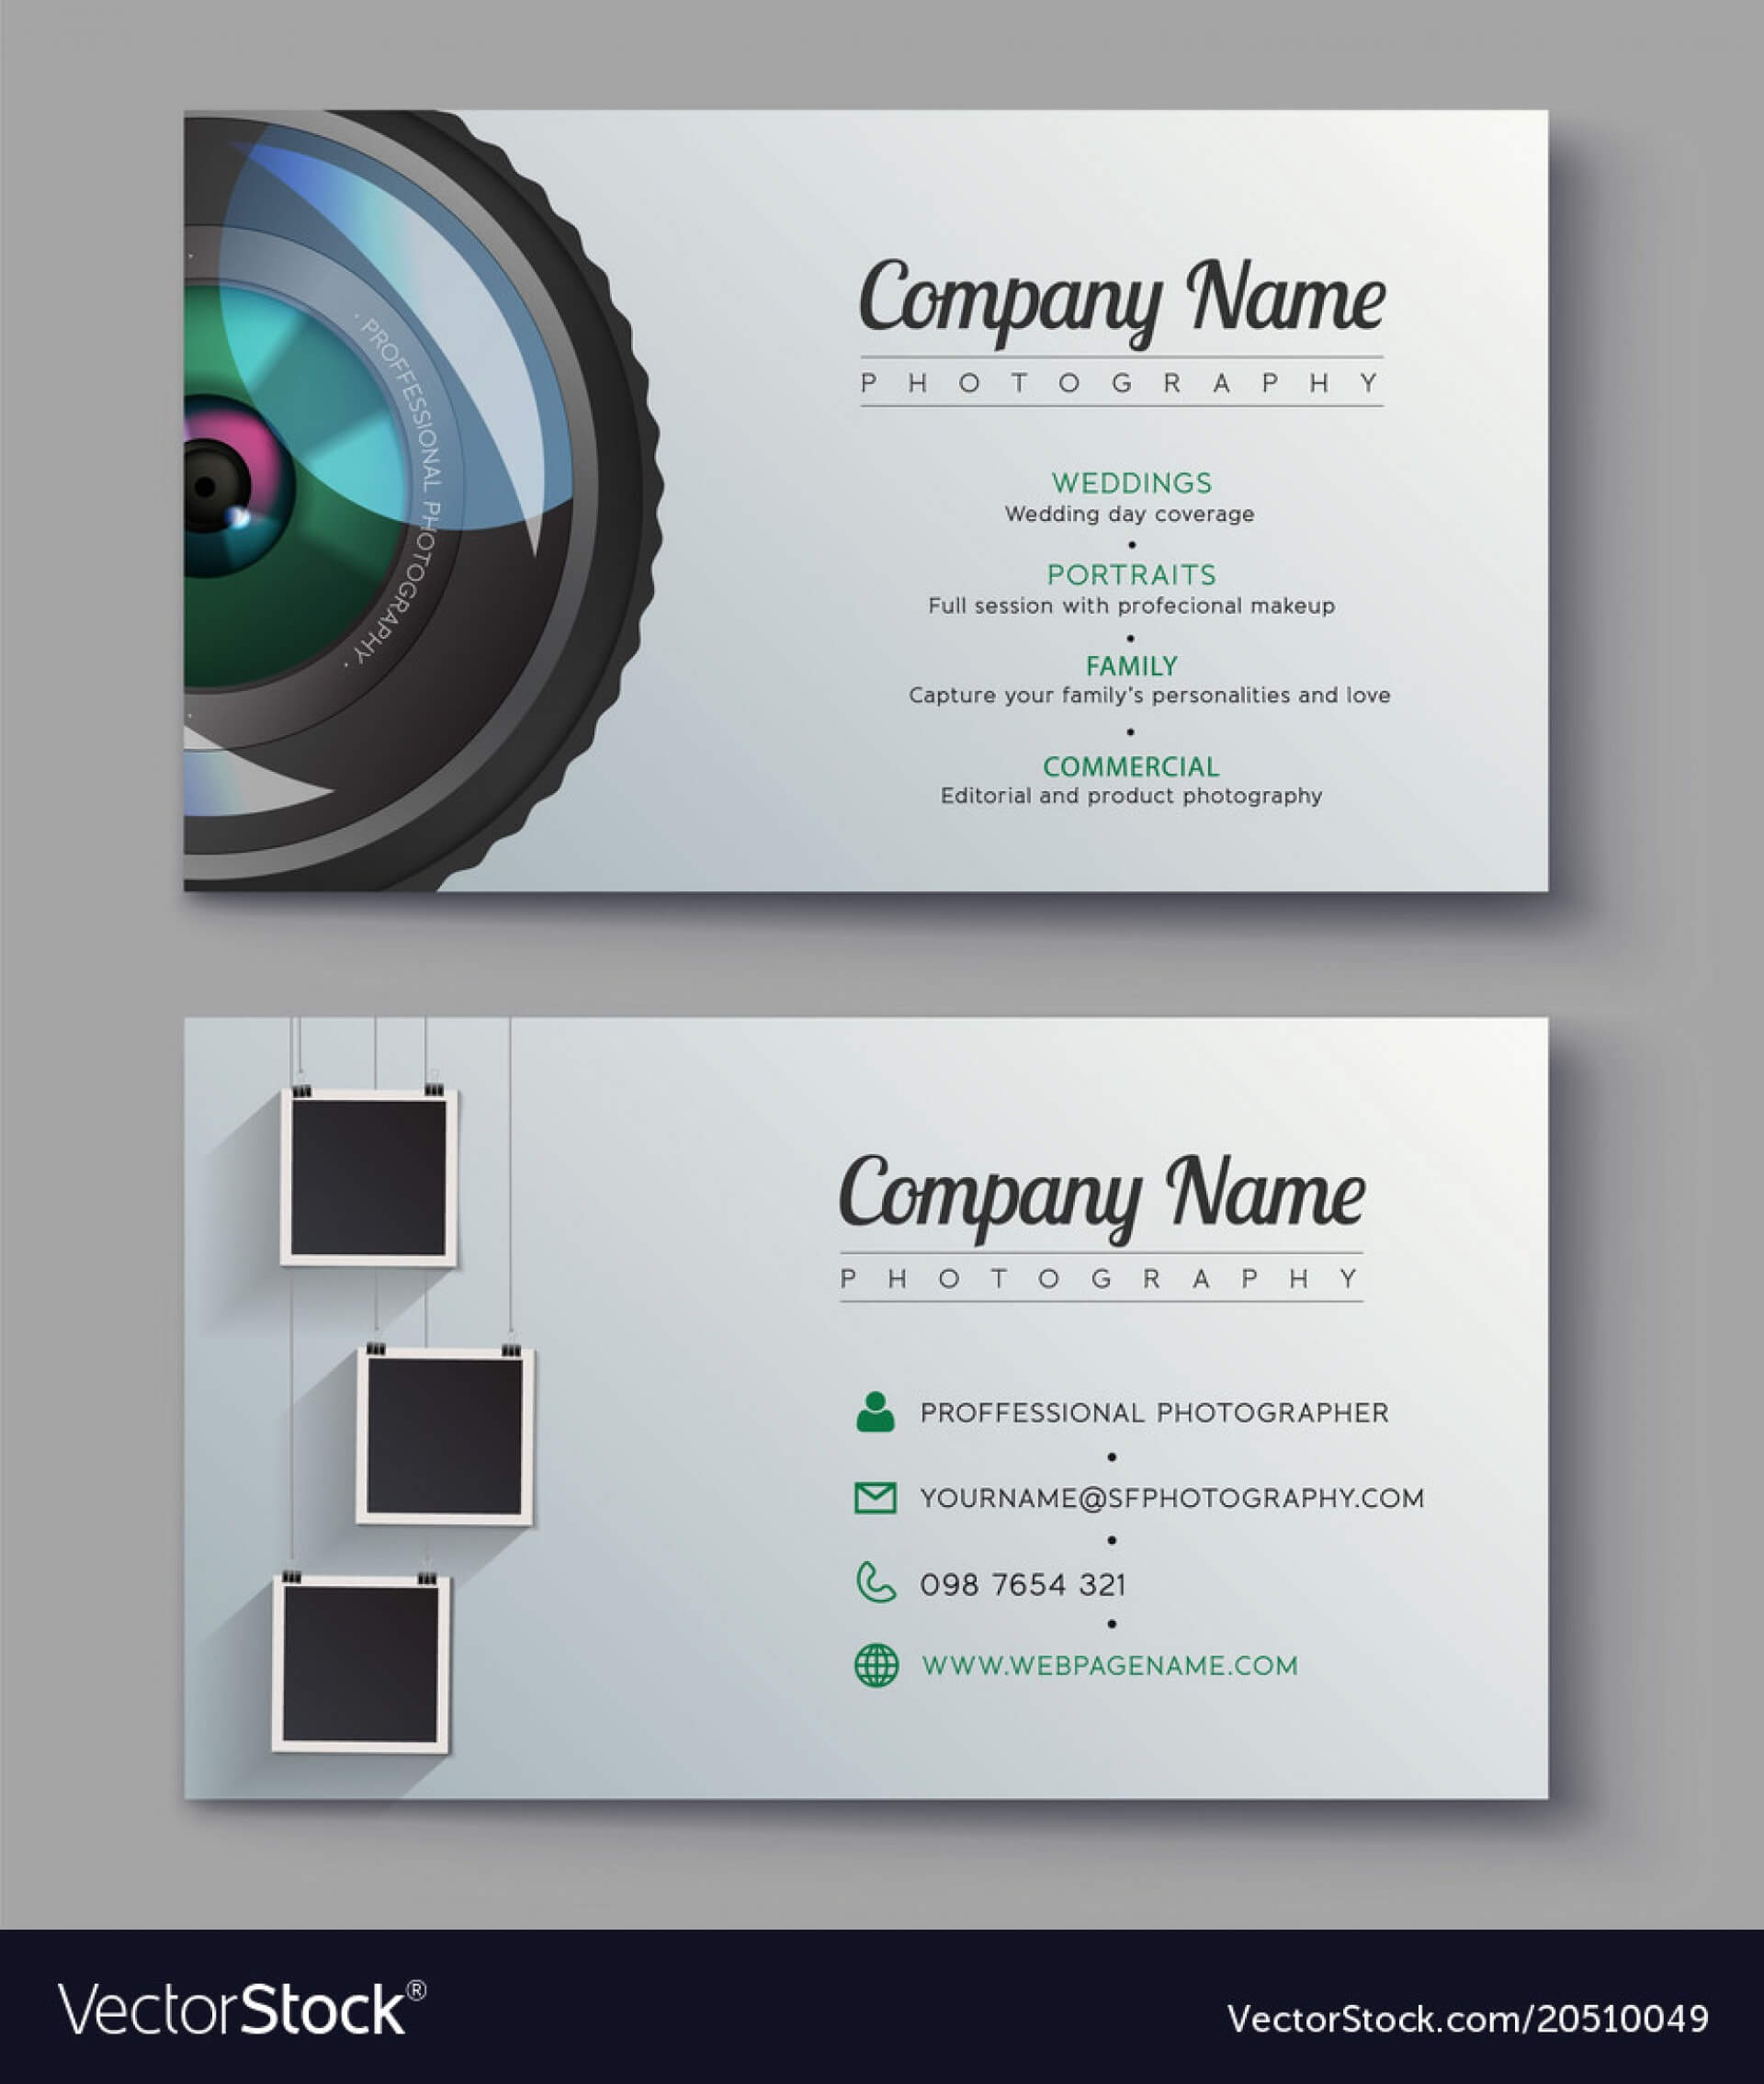 001 Photographer Business Card Template Design For Vector Throughout Free Business Card Templates For Photographers